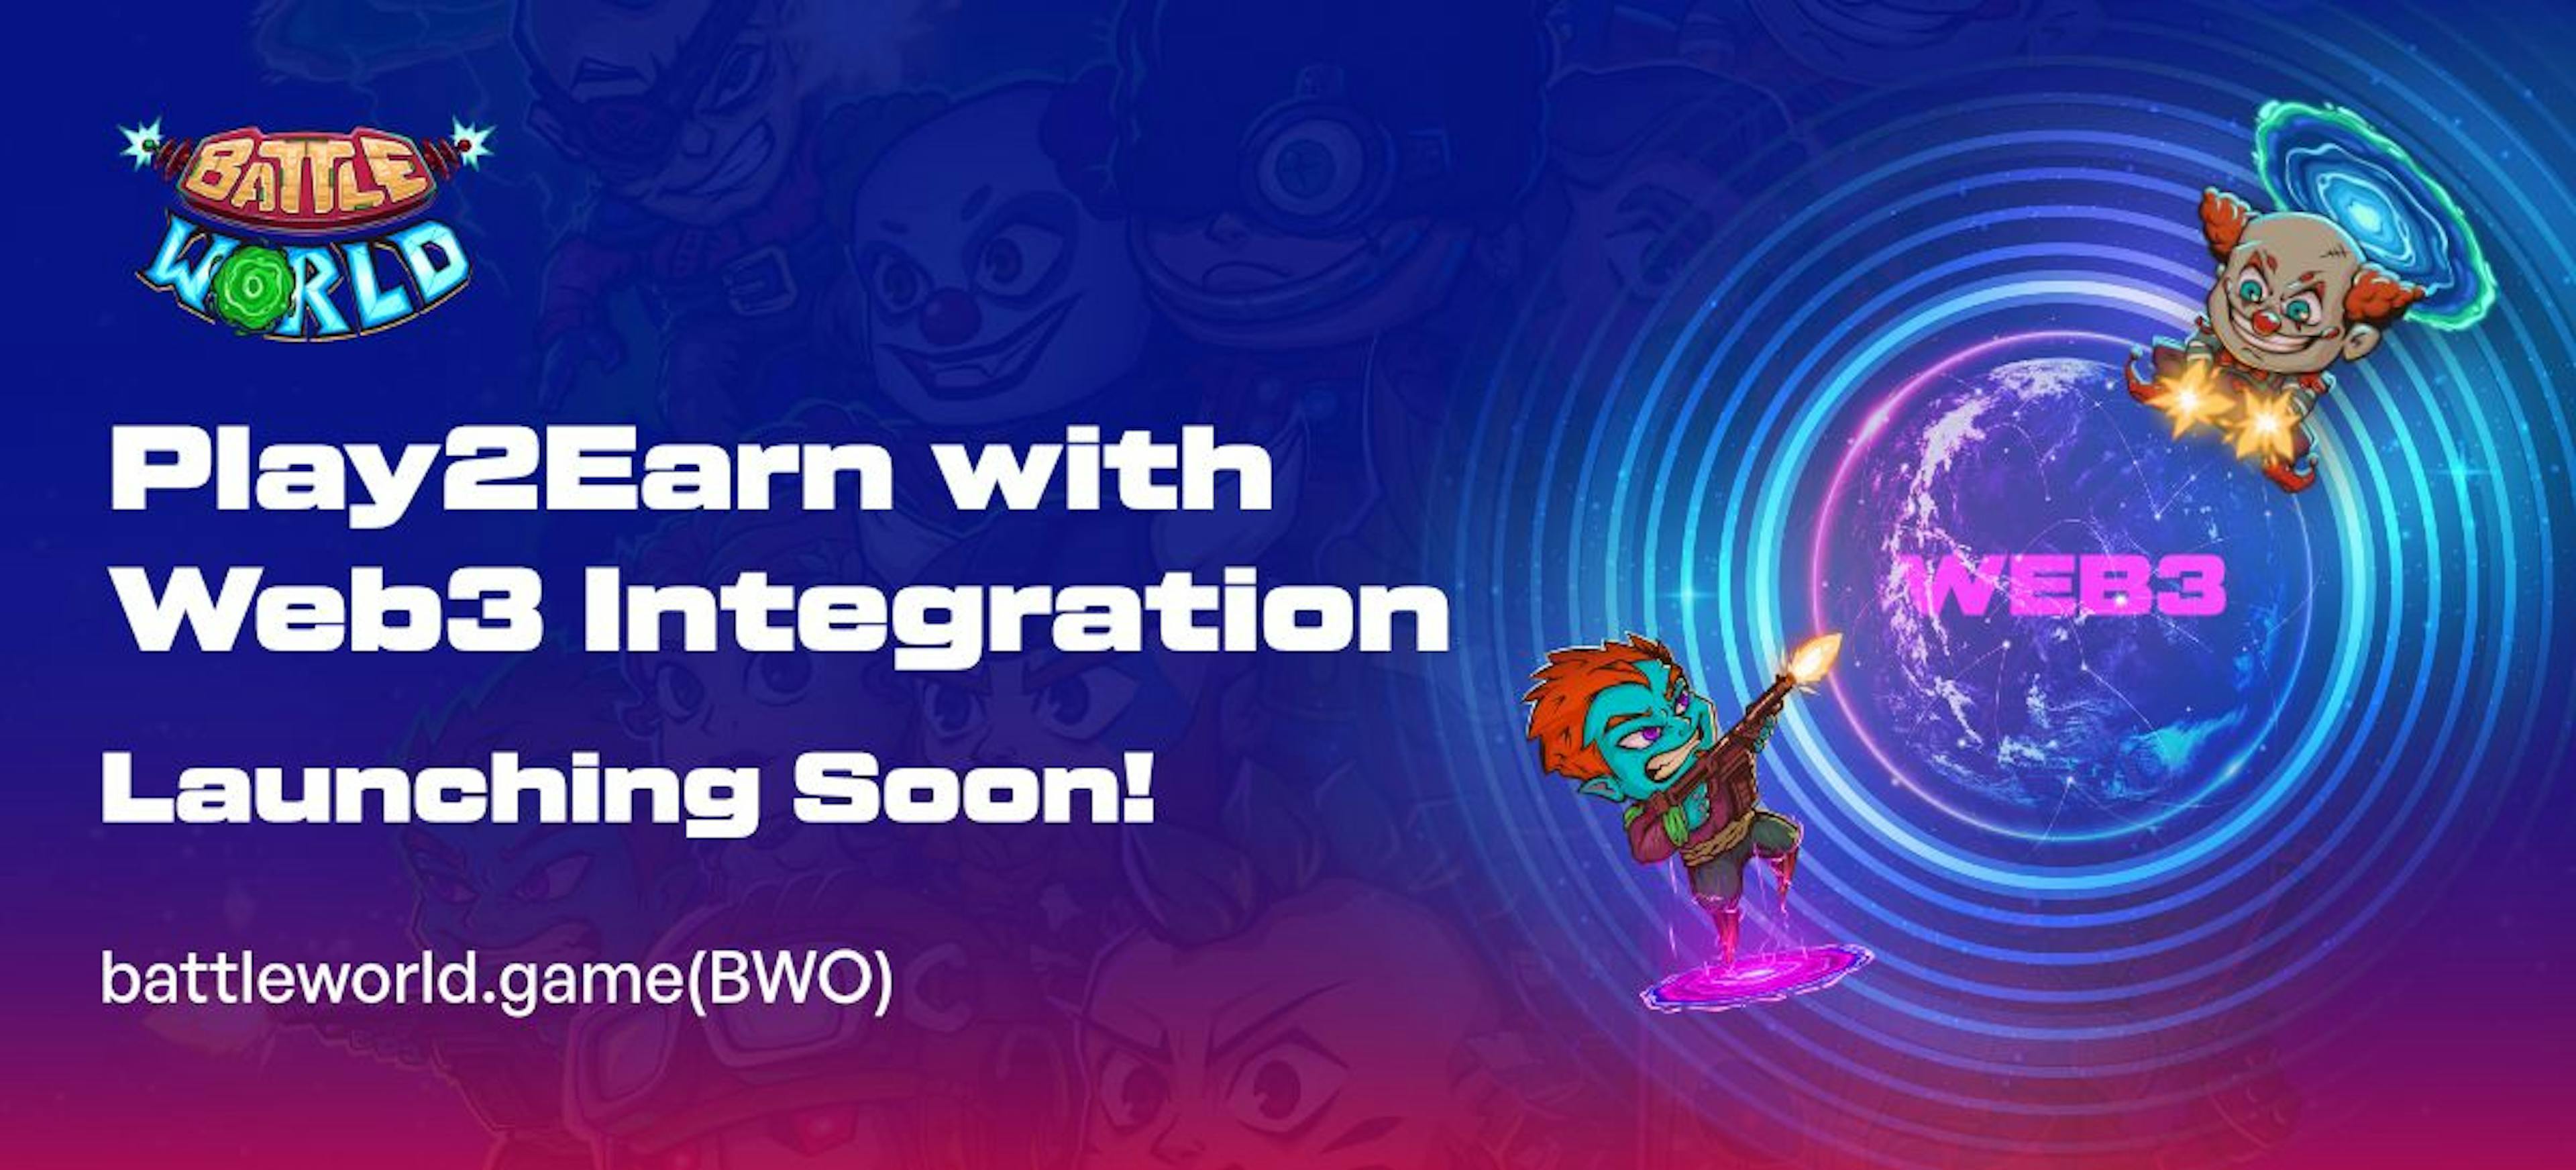 /battle-world-game-play2earn-with-web3-integration-launching-soon feature image